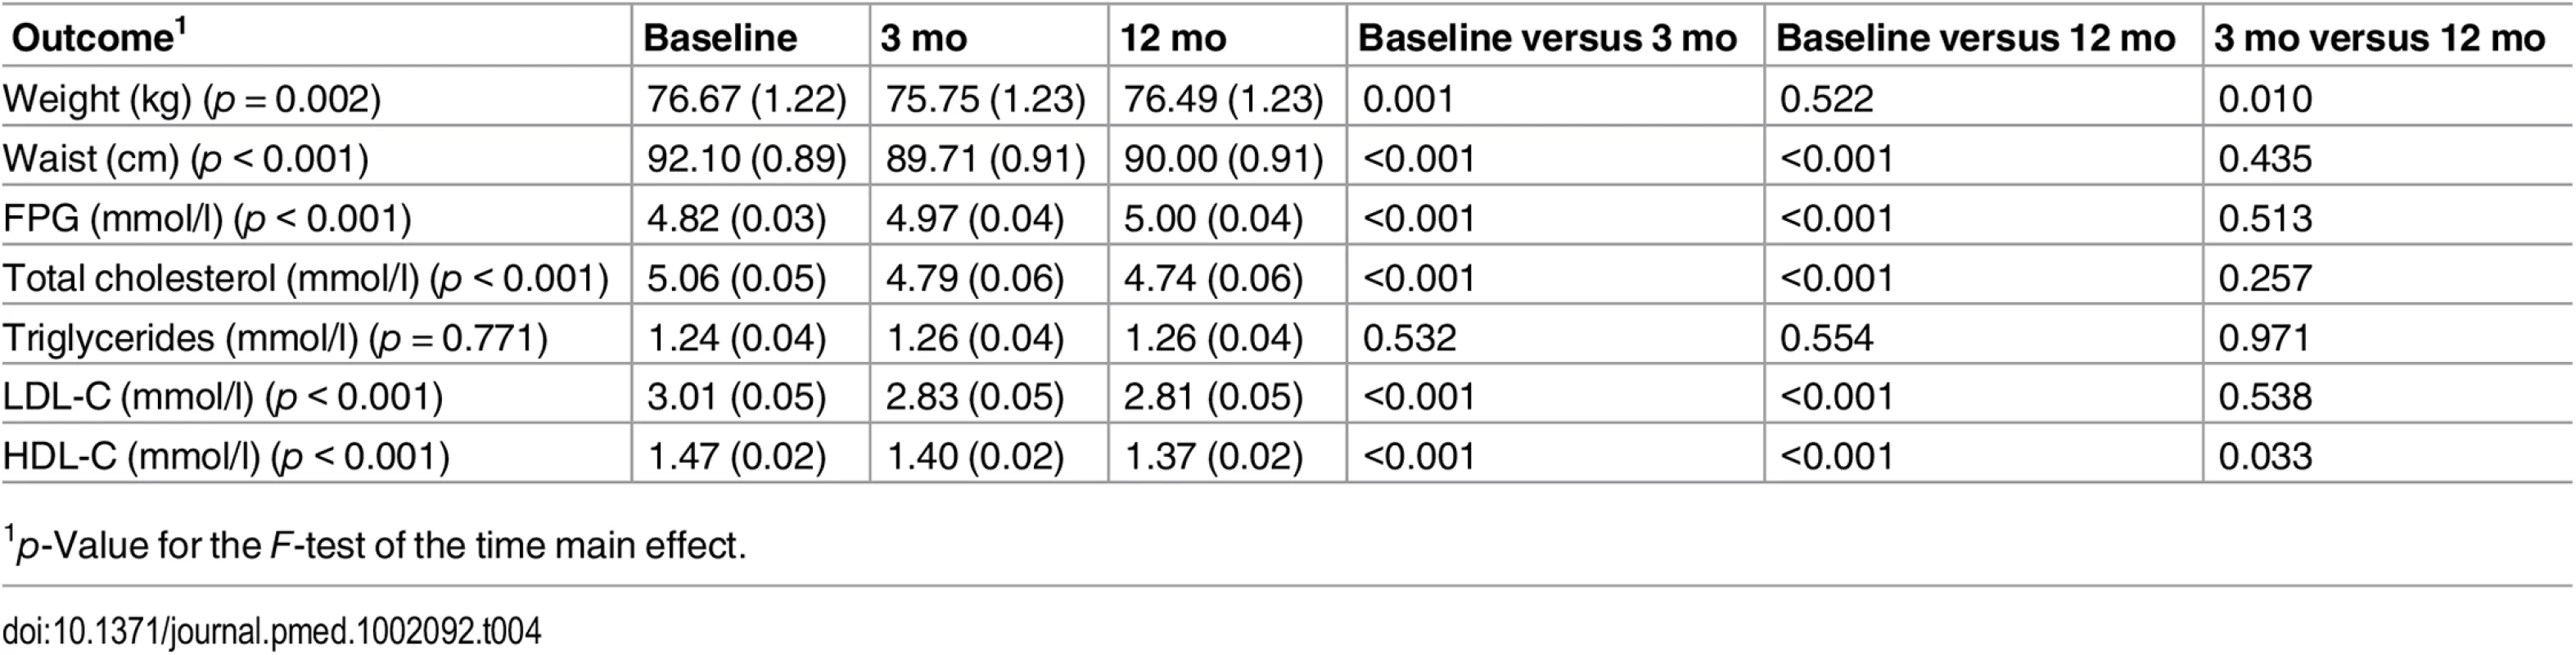 Predicted means (standard errors) of primary and secondary endpoints for participants in the intervention group at baseline, 3 mo, and 12 mo.